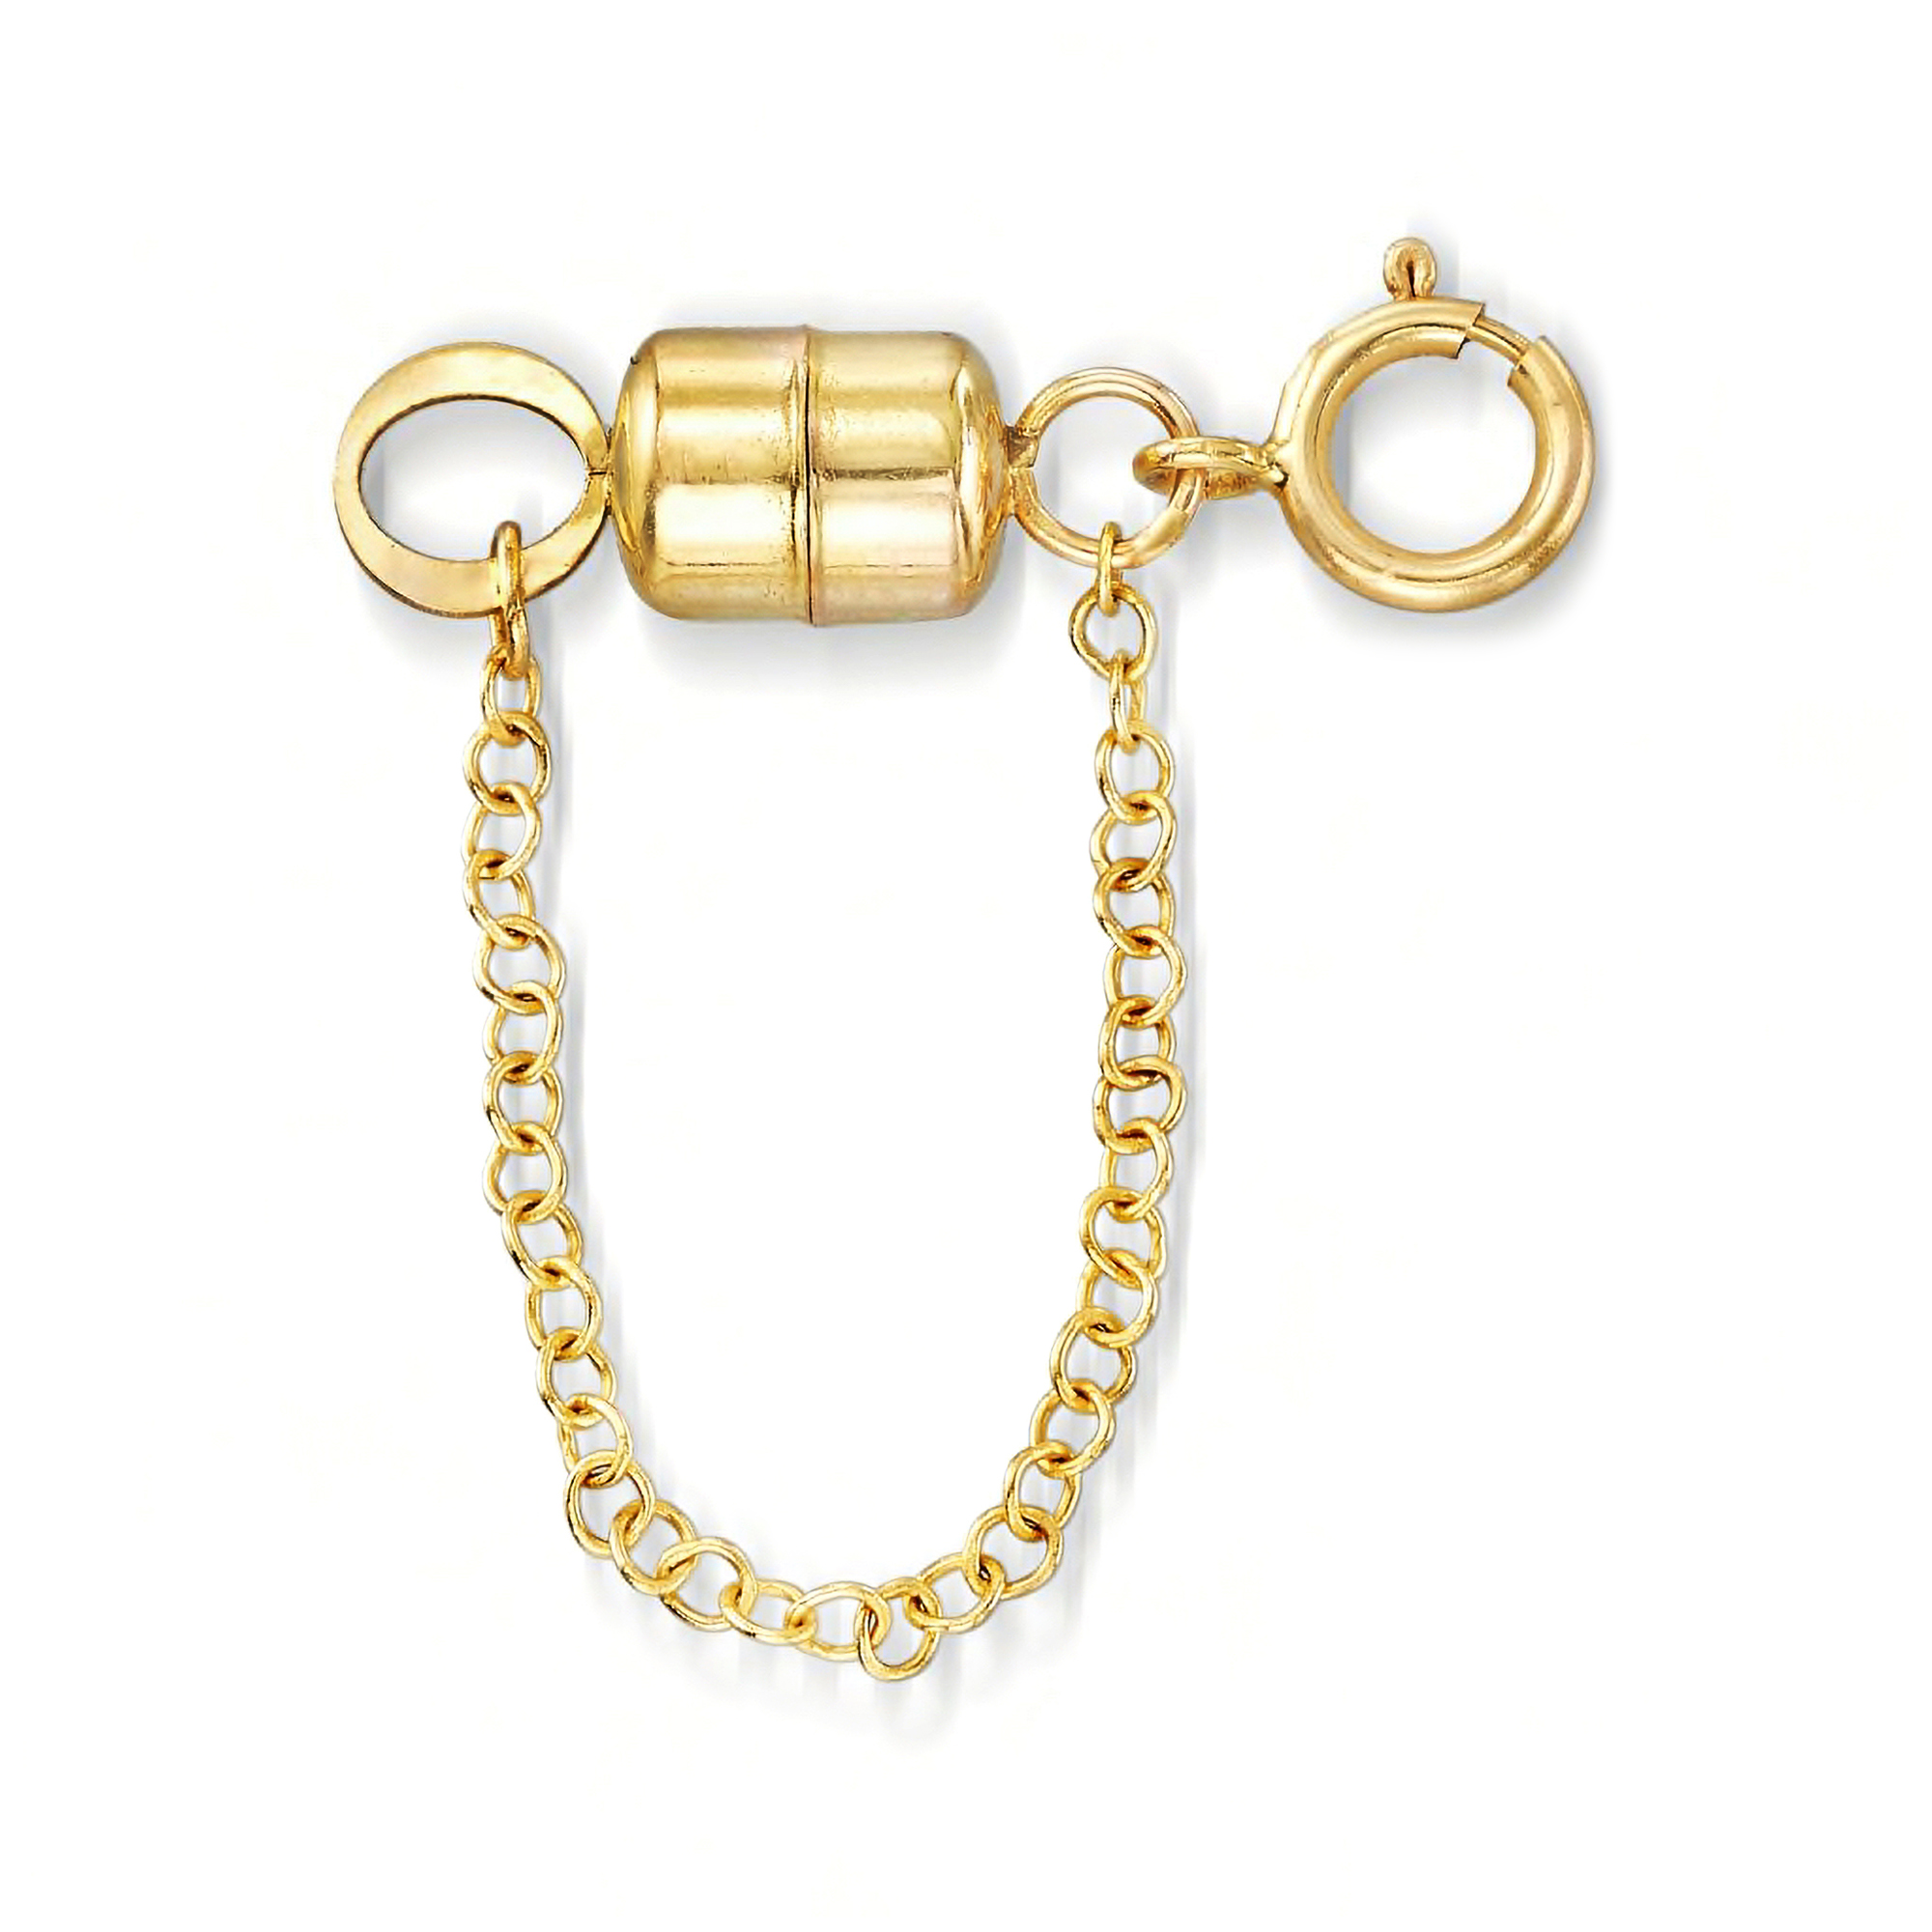 Wholesale Brass Magnetic Clasp with Cable Safety Chain 